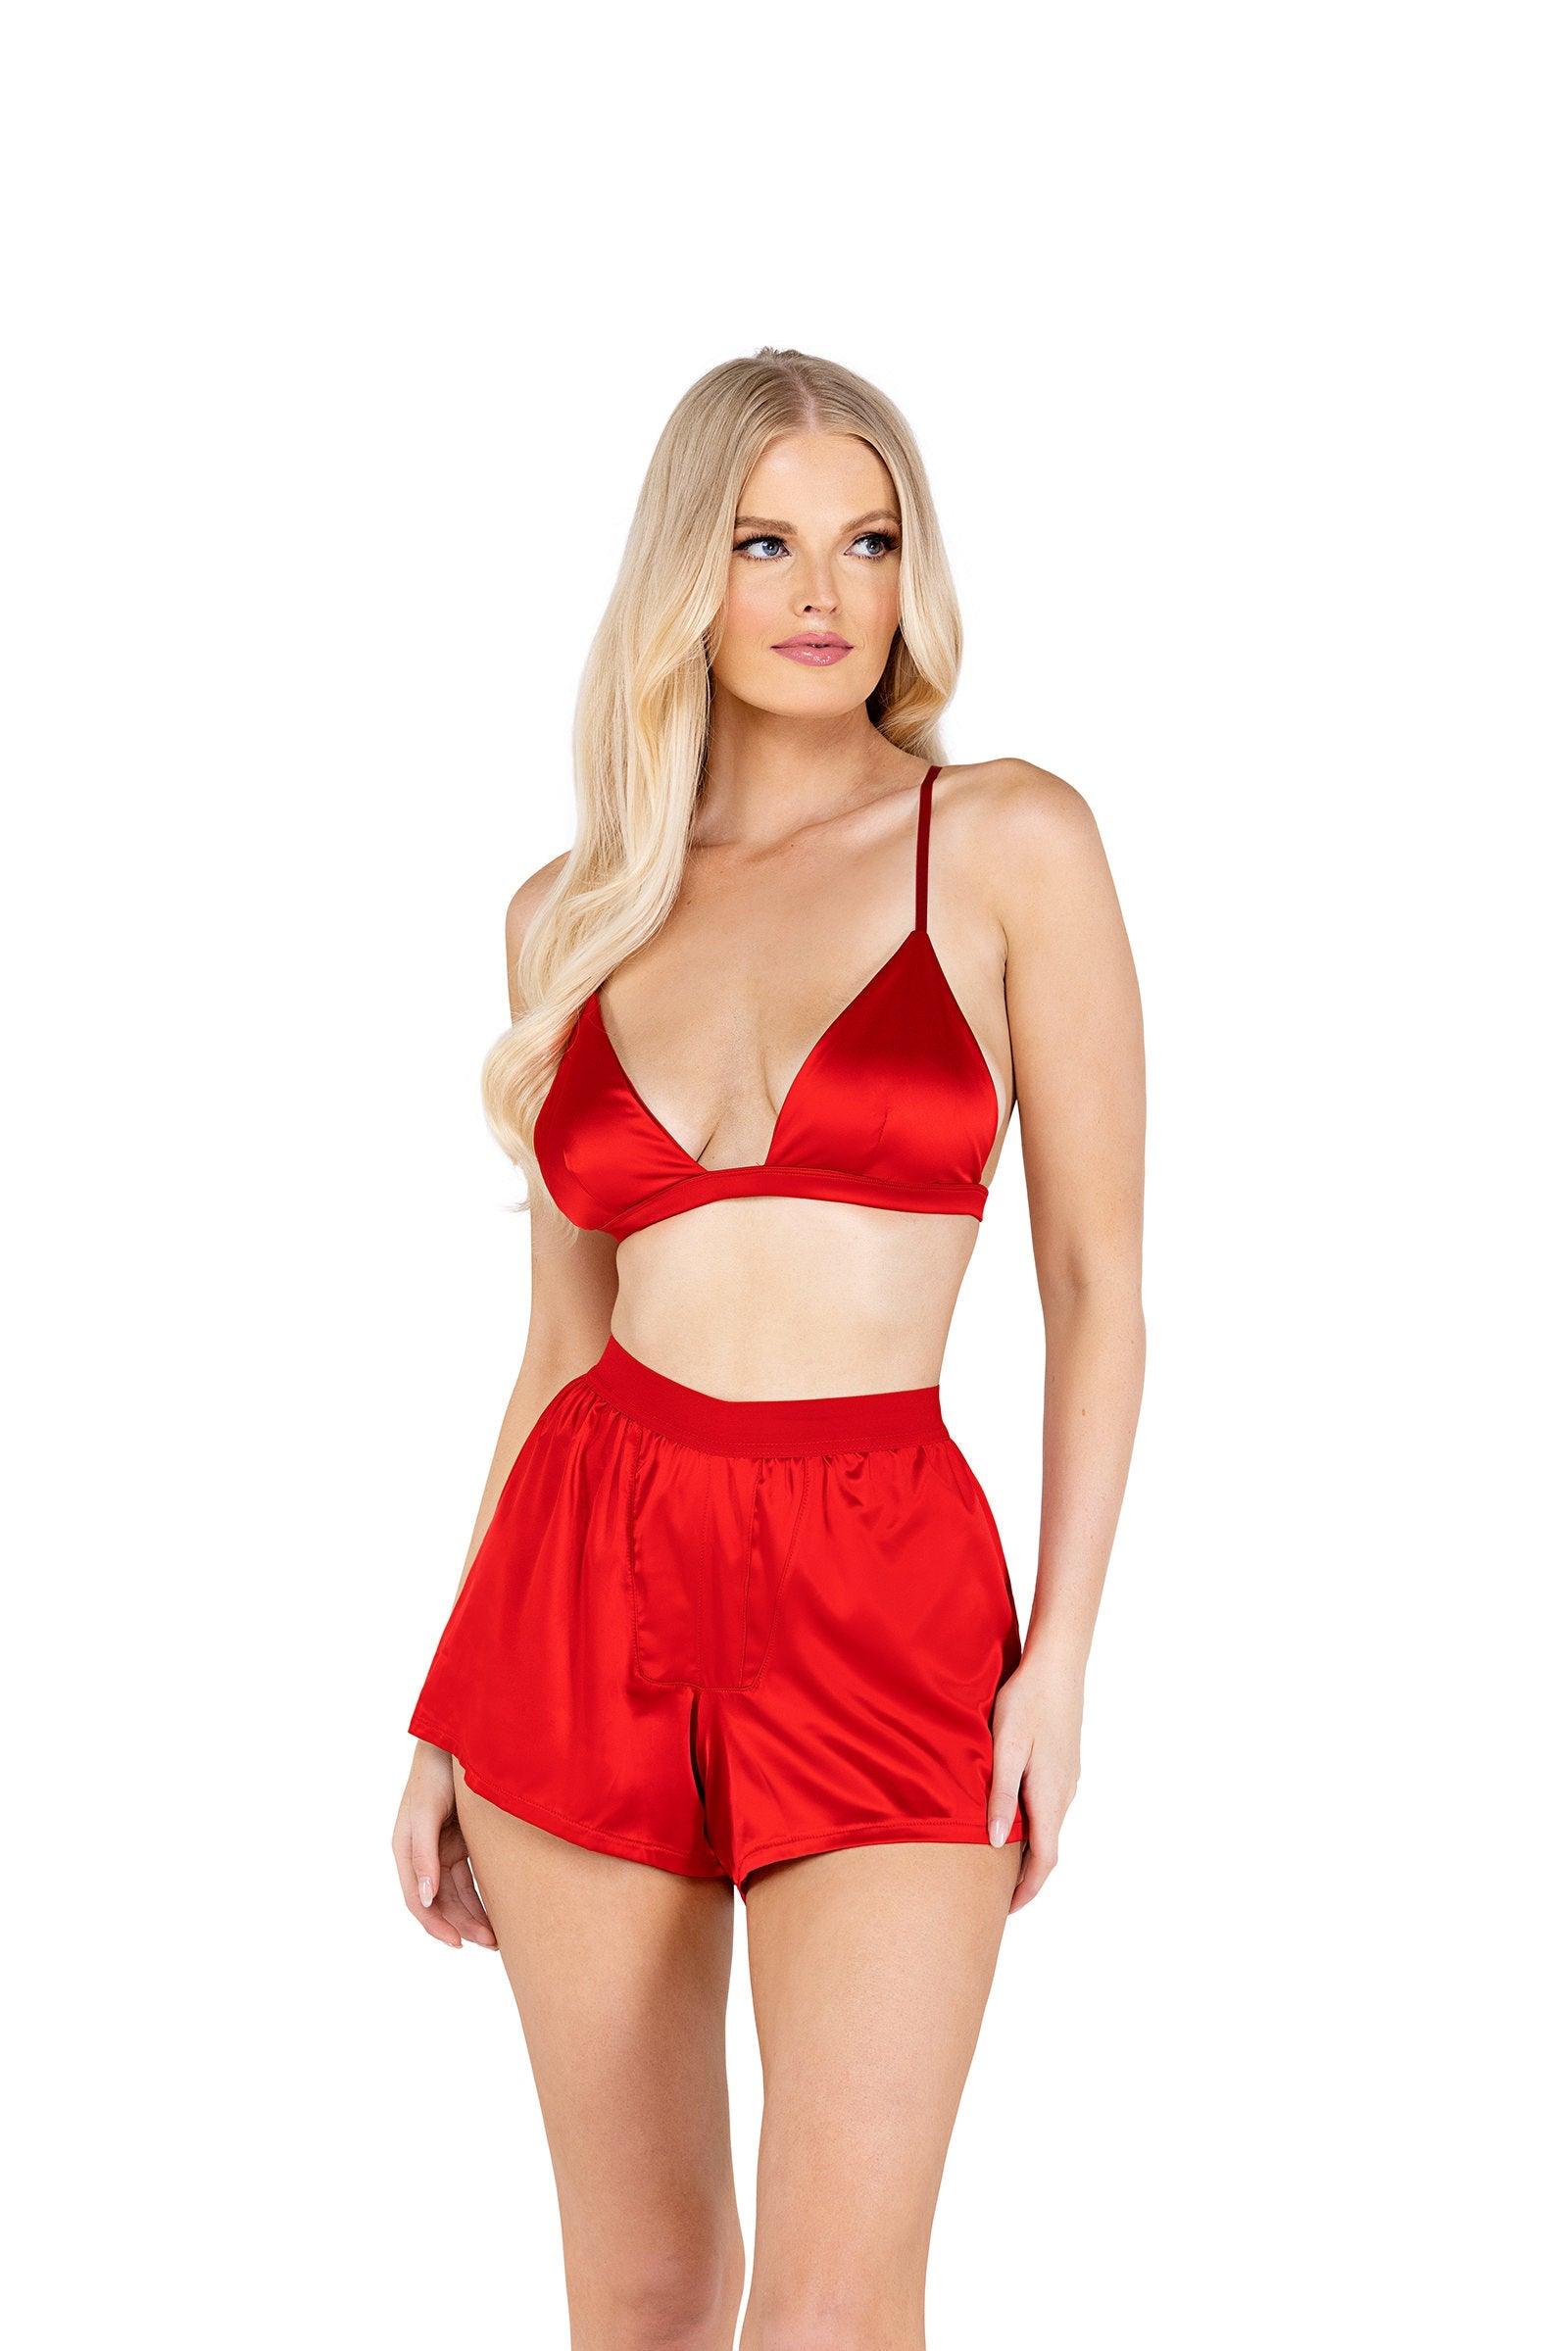 Roma Costume 2PC Satin Lounge Set with Triangle Top & Boxer Shorts - Flyclothing LLC